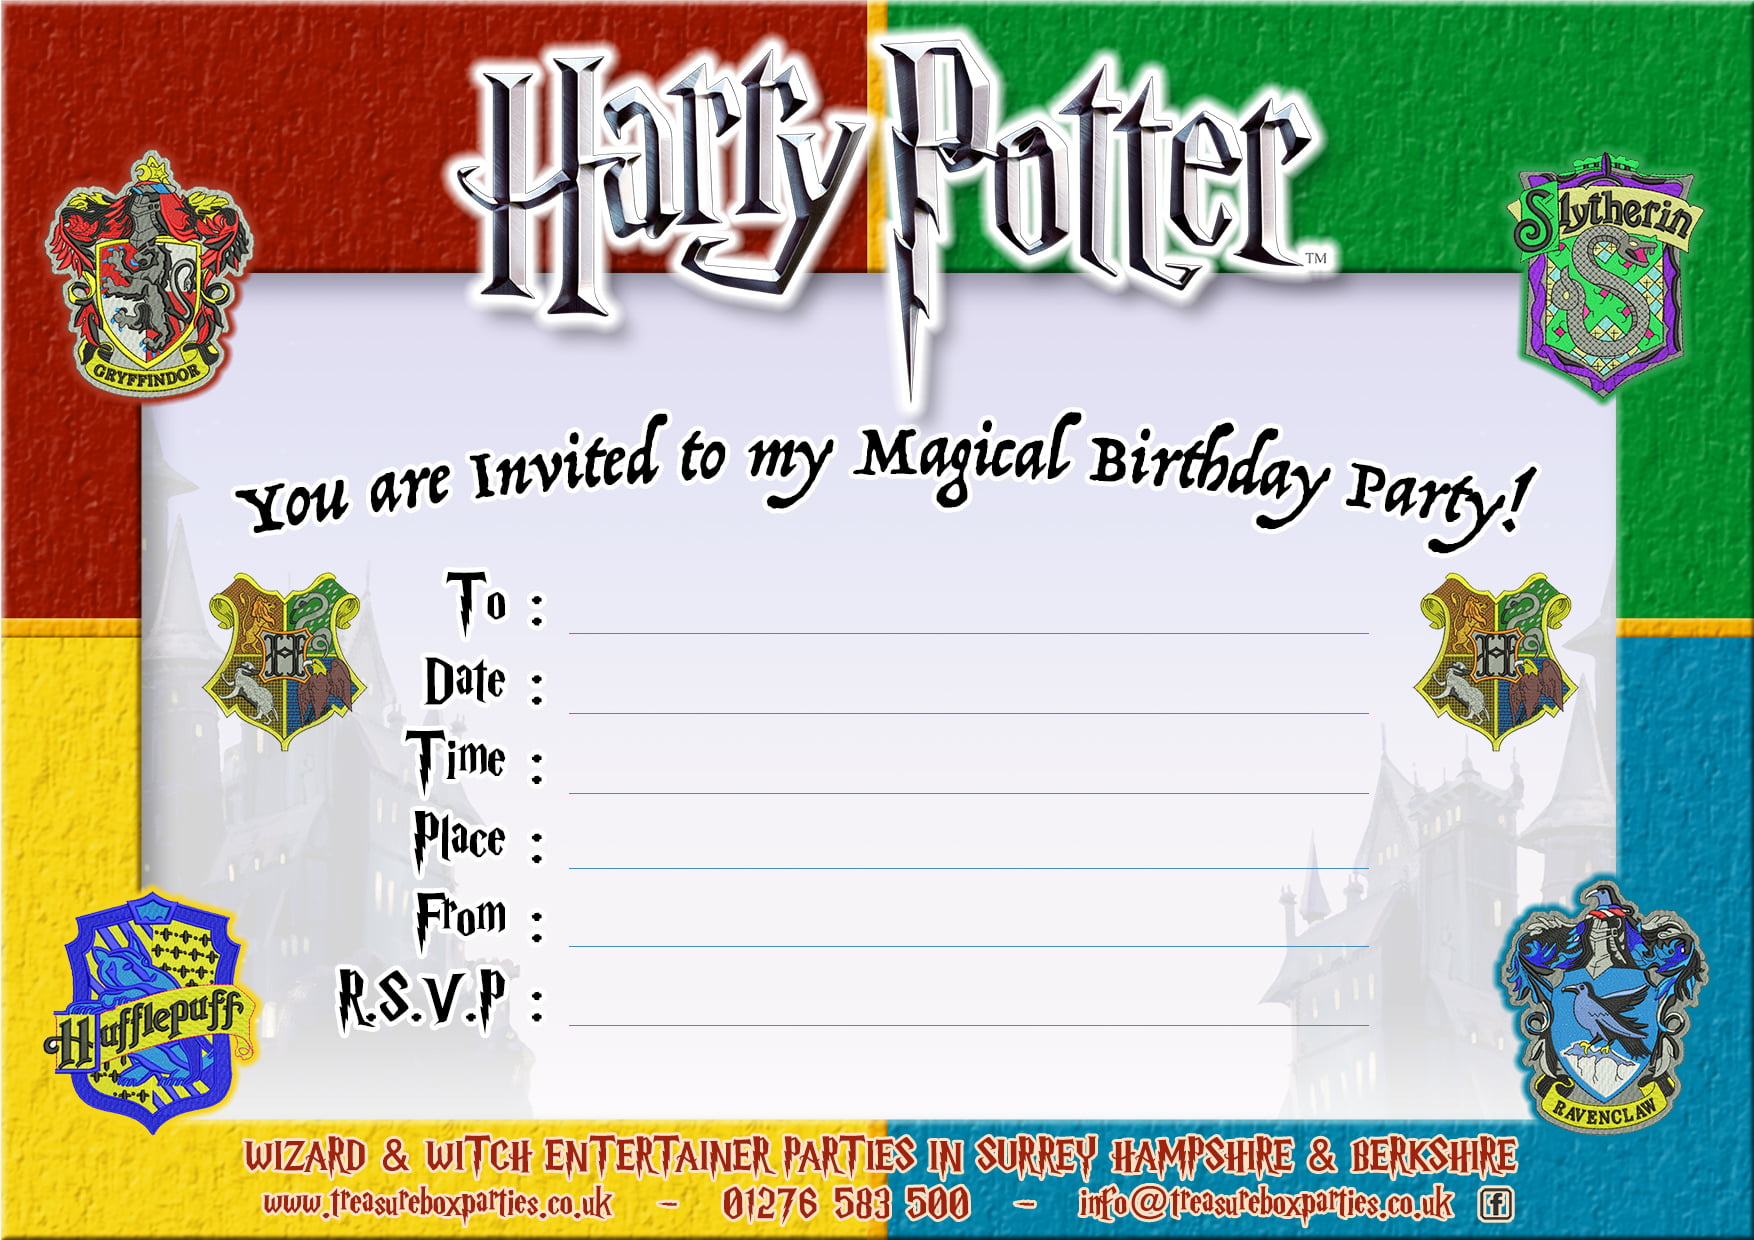 Harry Potter Birthday Party Invitations FREE Printable Baby Shower